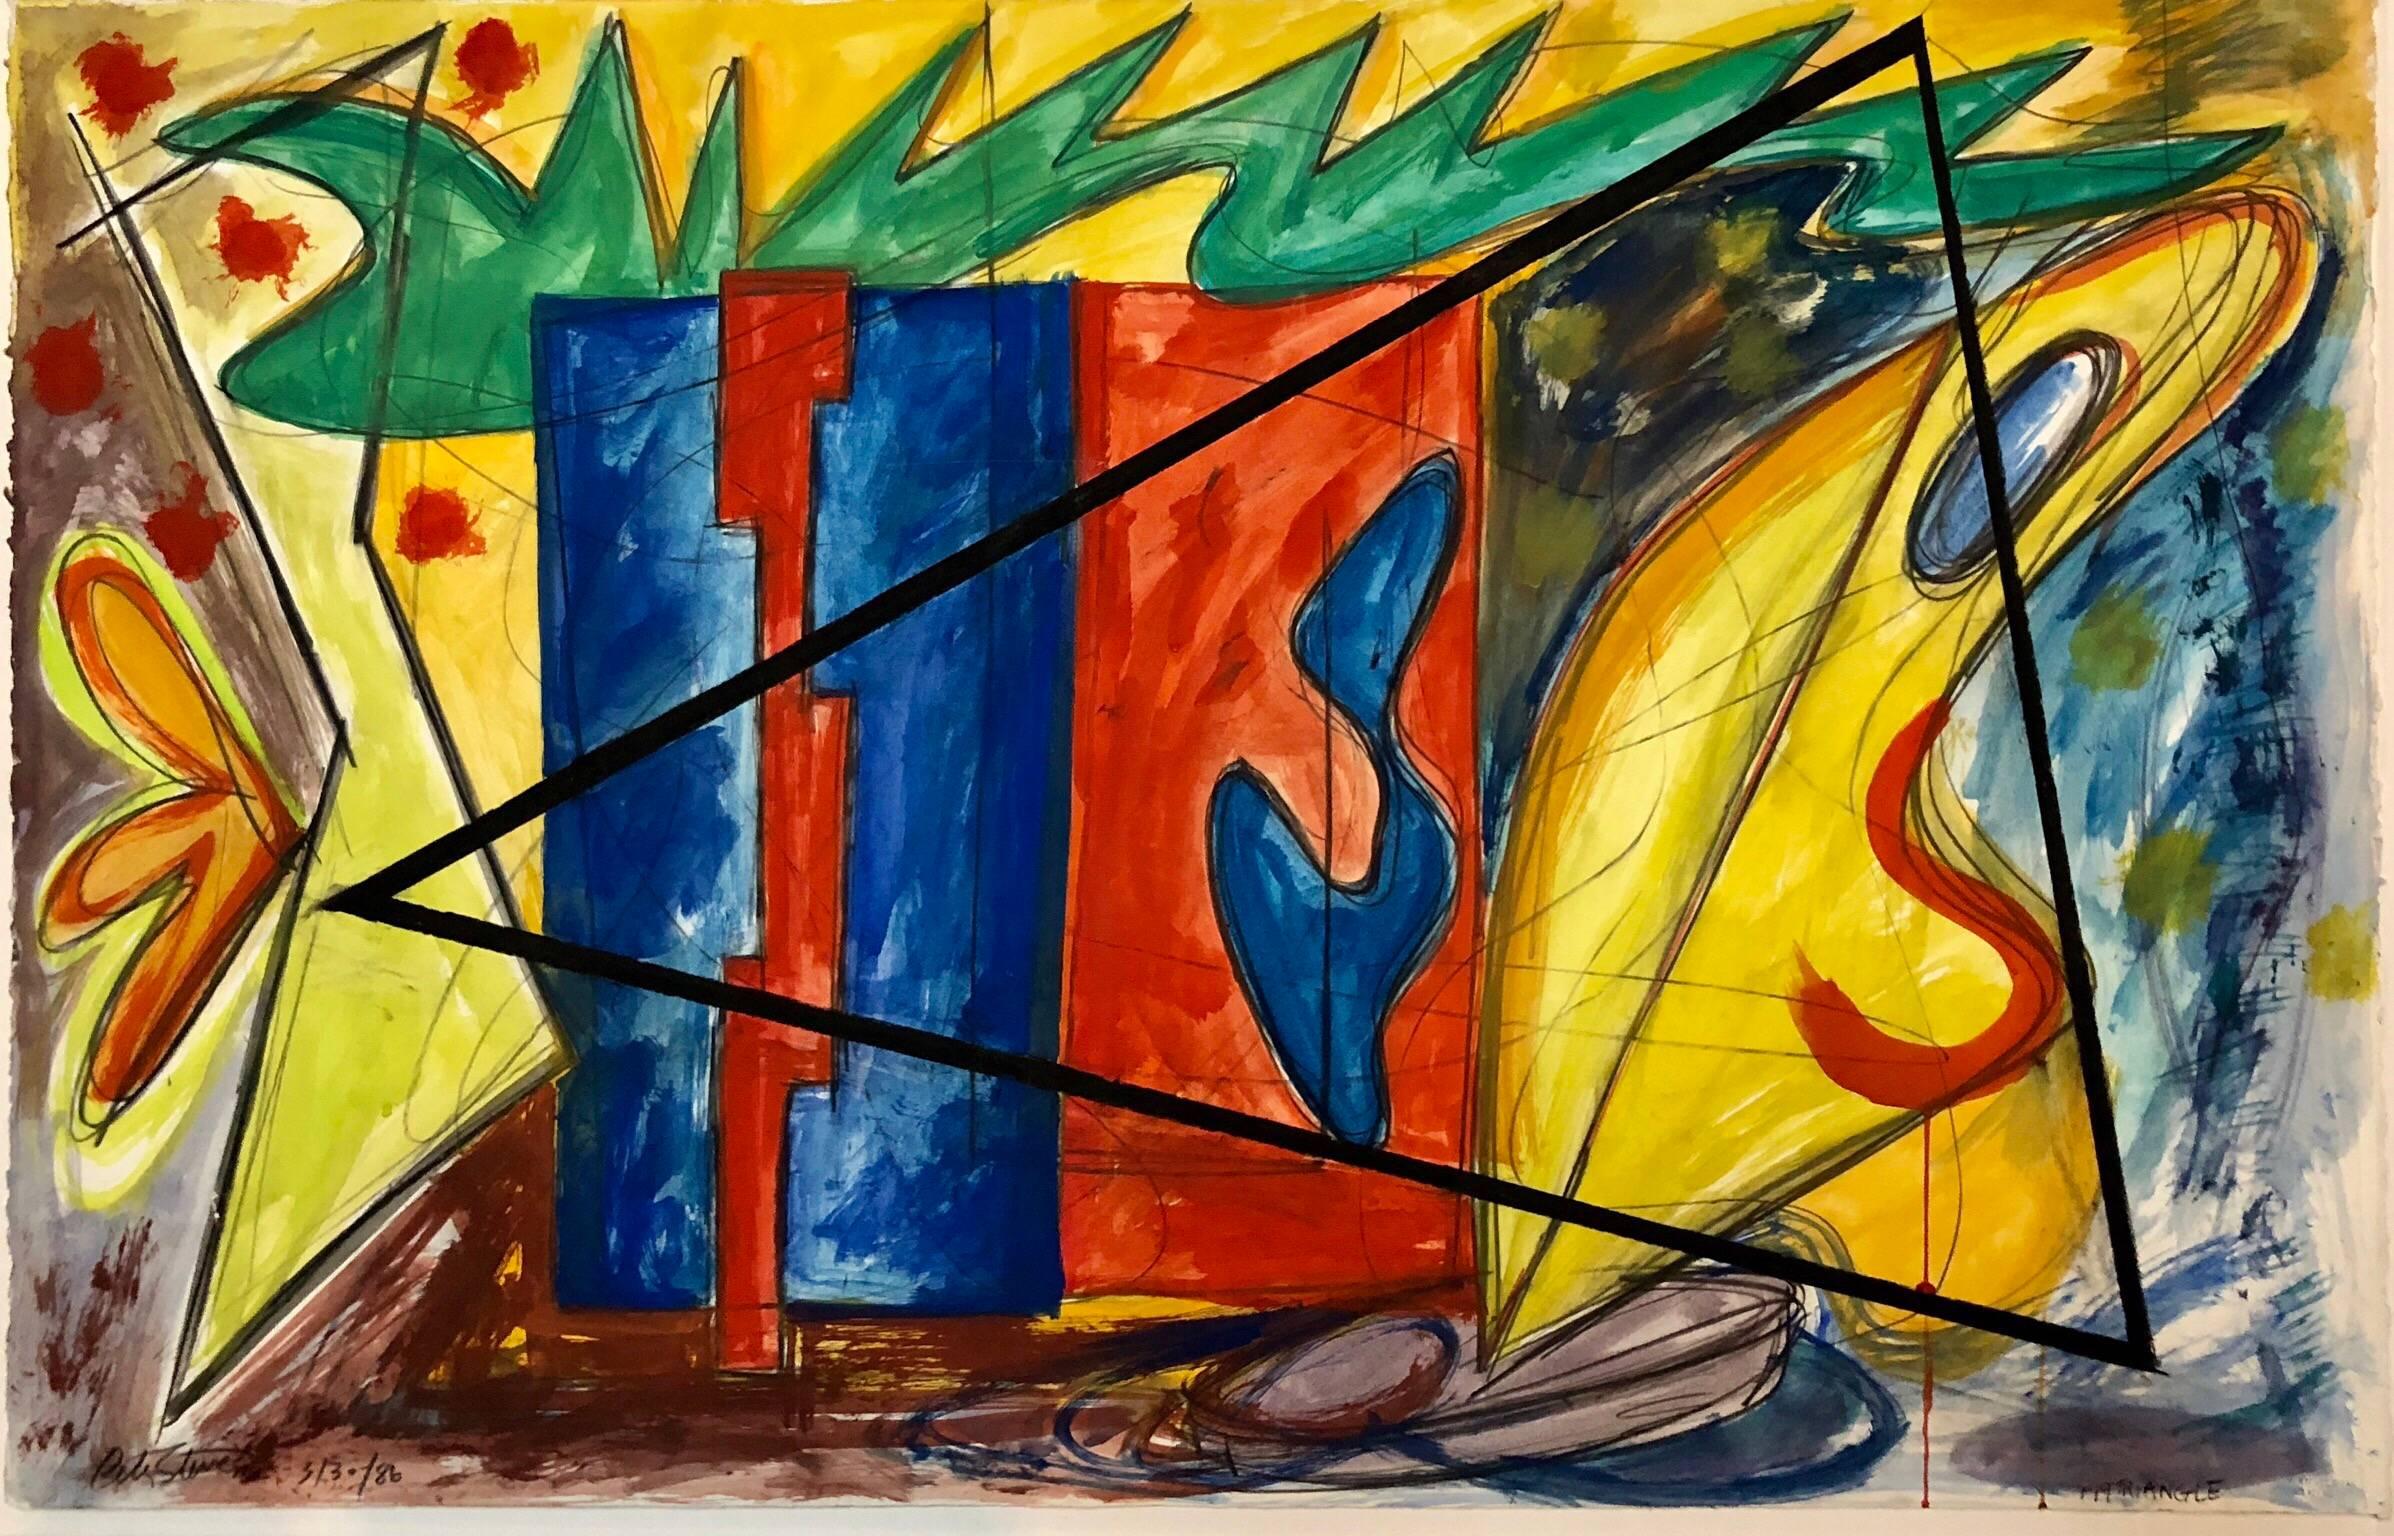  it is currently unframed and will be sold thus. Similar in style to the 80s work of Elizabeth Murray. A bright, colorful expressive piece signed (labels are not included as it is unframed.)

Peter Stevens is an American artist, known for his